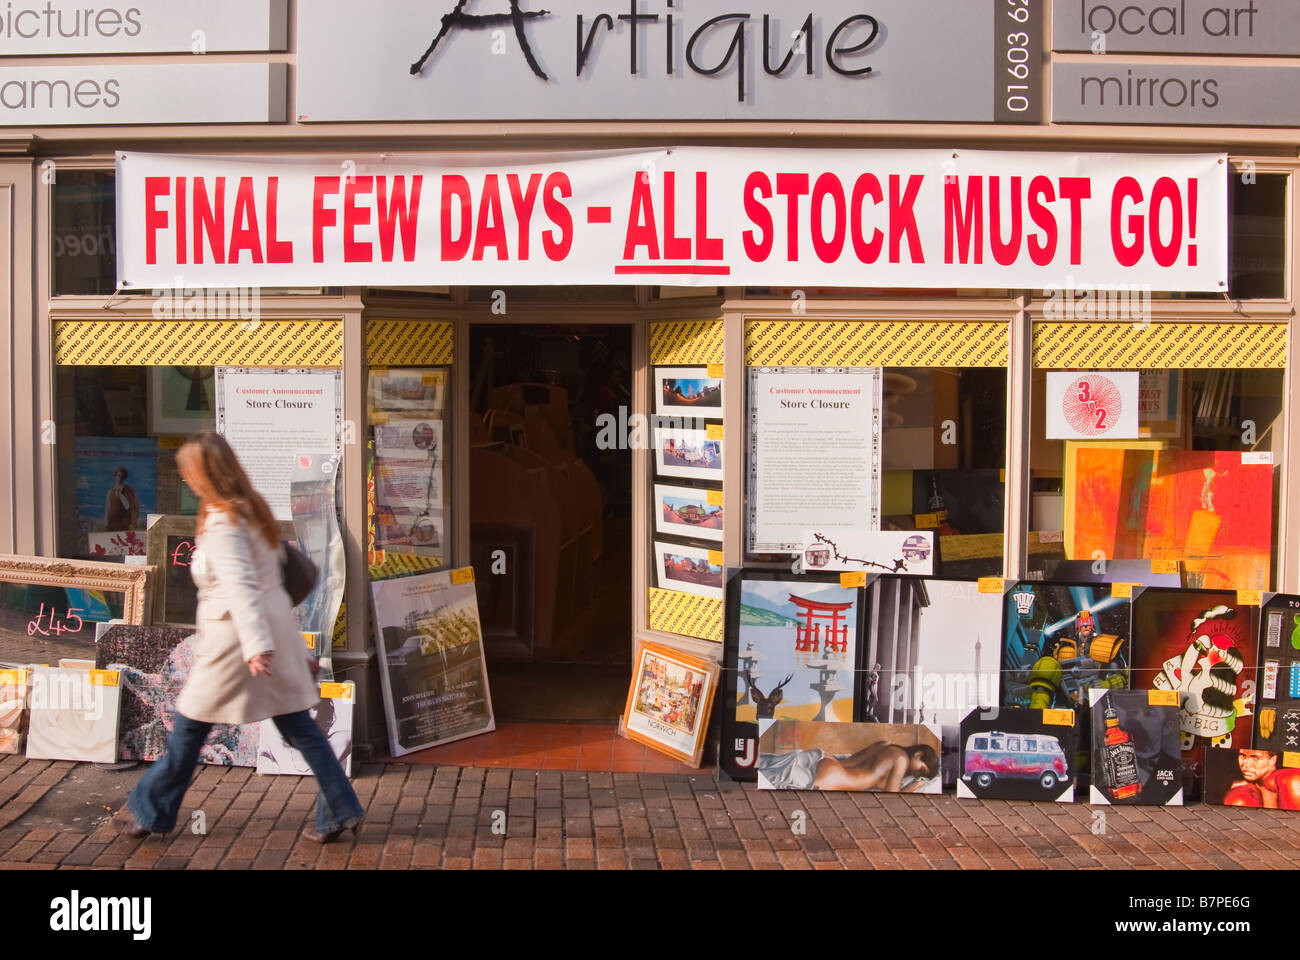 Artique shop store selling prints,pictures and frames in closing down sale in Norwich,Norfolk,Uk Stock Photo